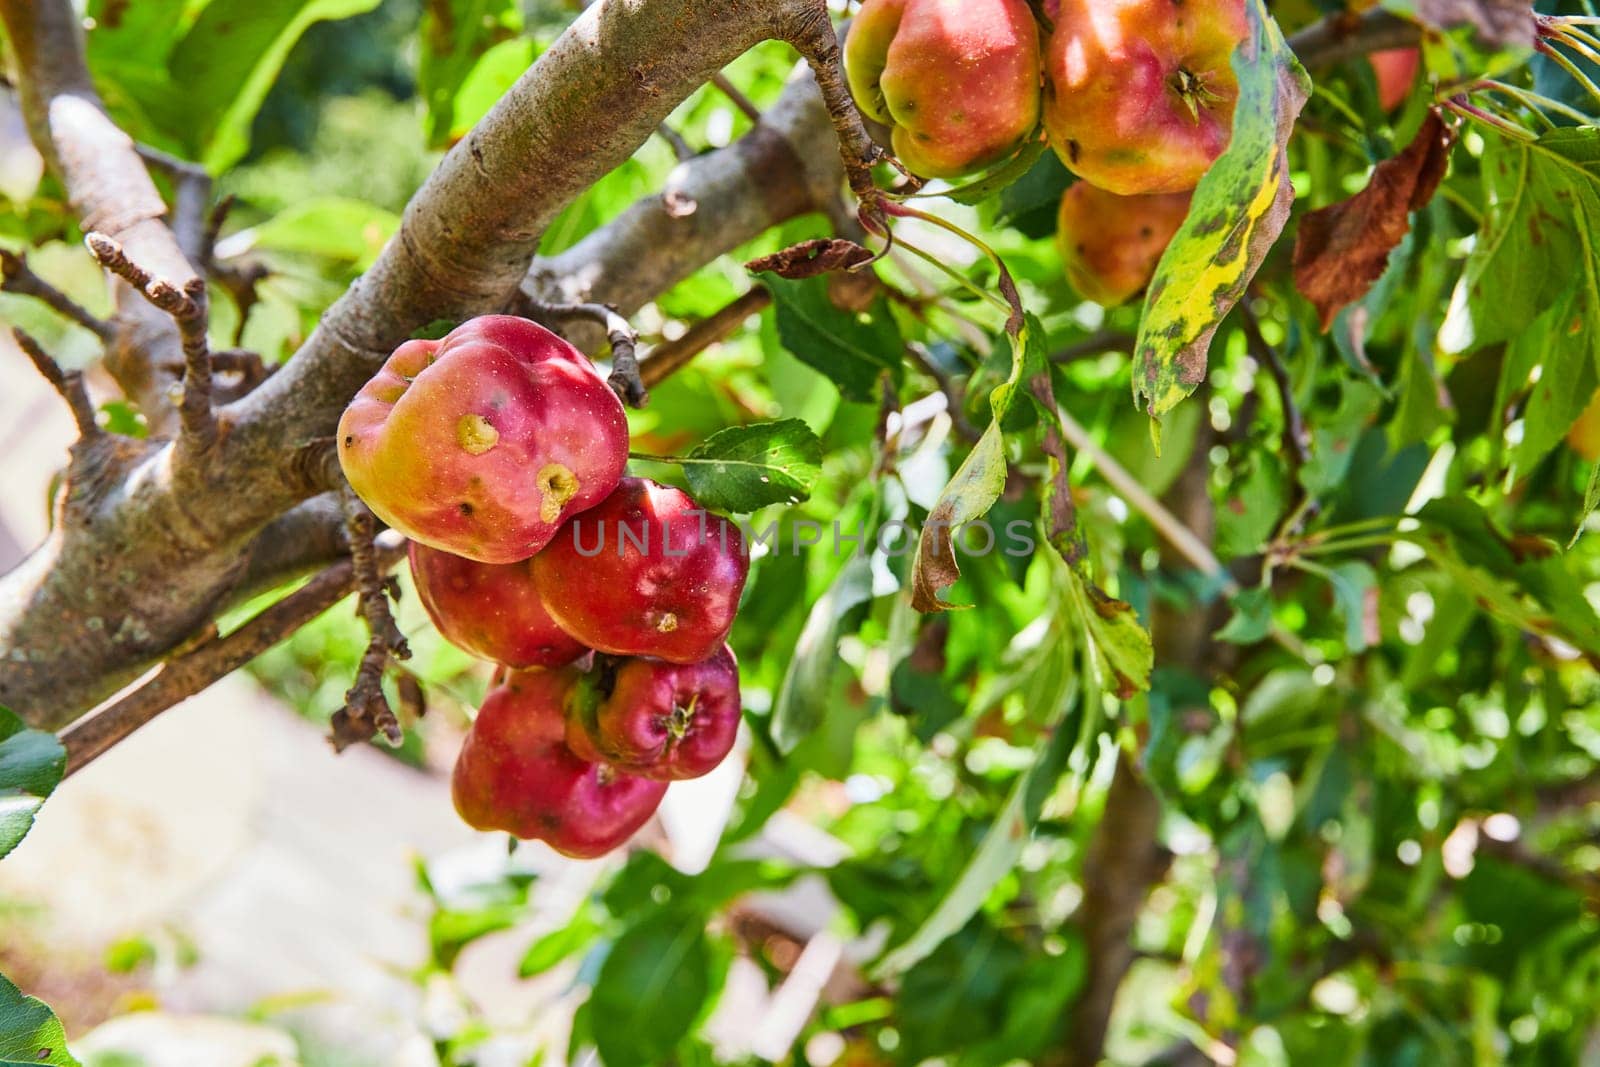 Ripe Apples on Dwarf Tree in Orchard, Eye-Level View by njproductions